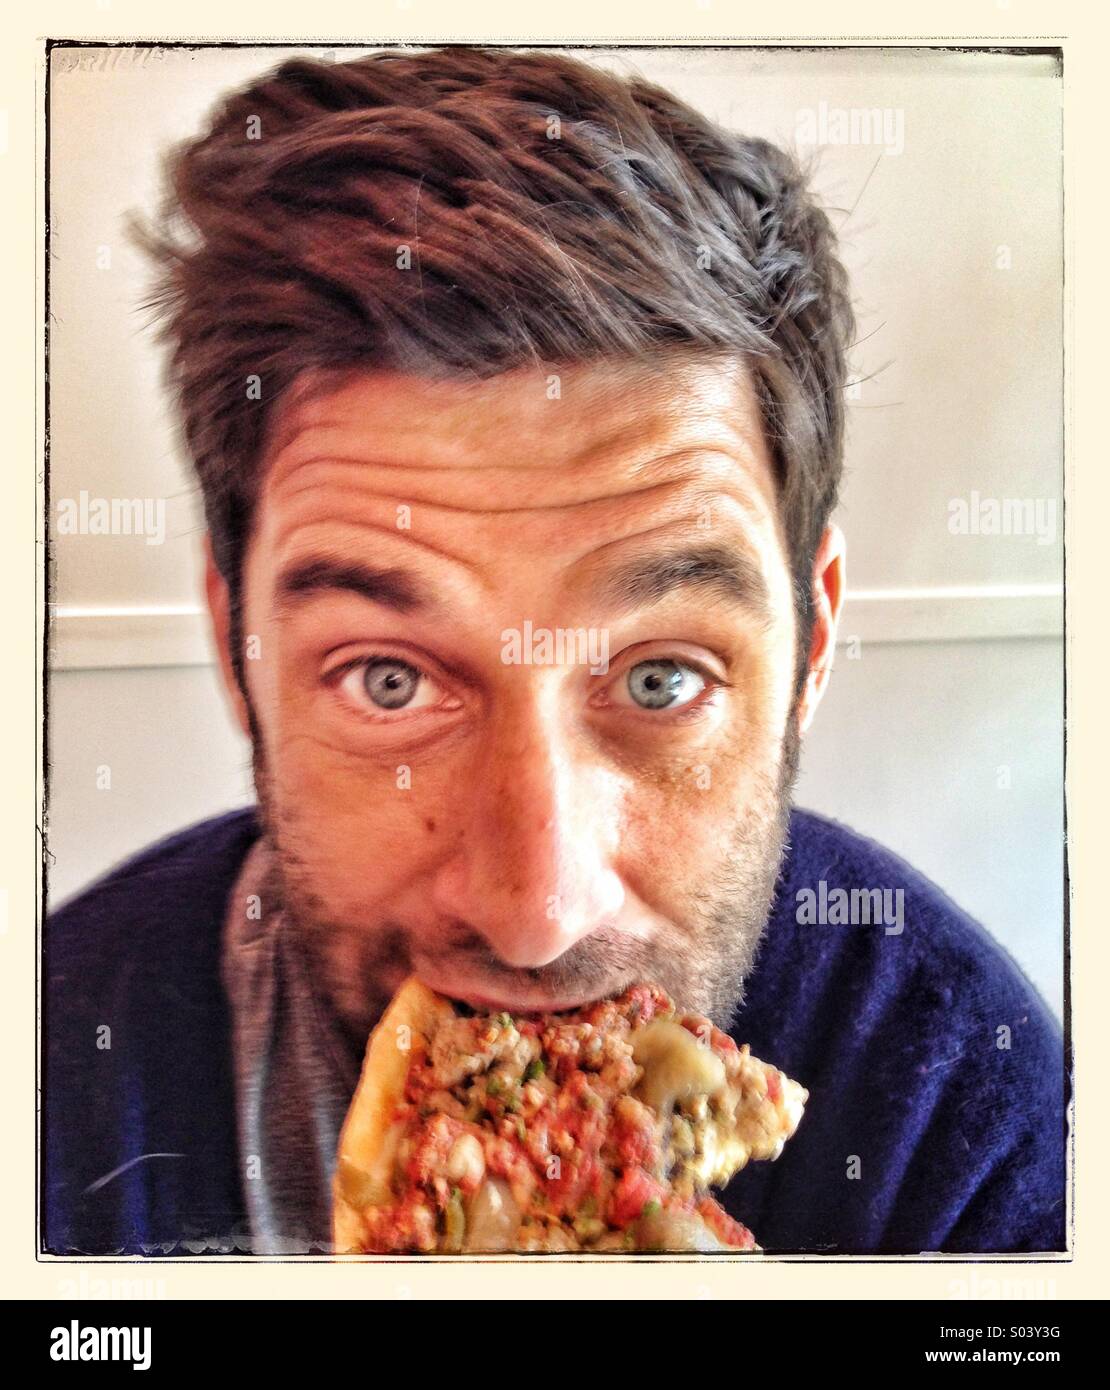 Guy eating pizza Banque D'Images